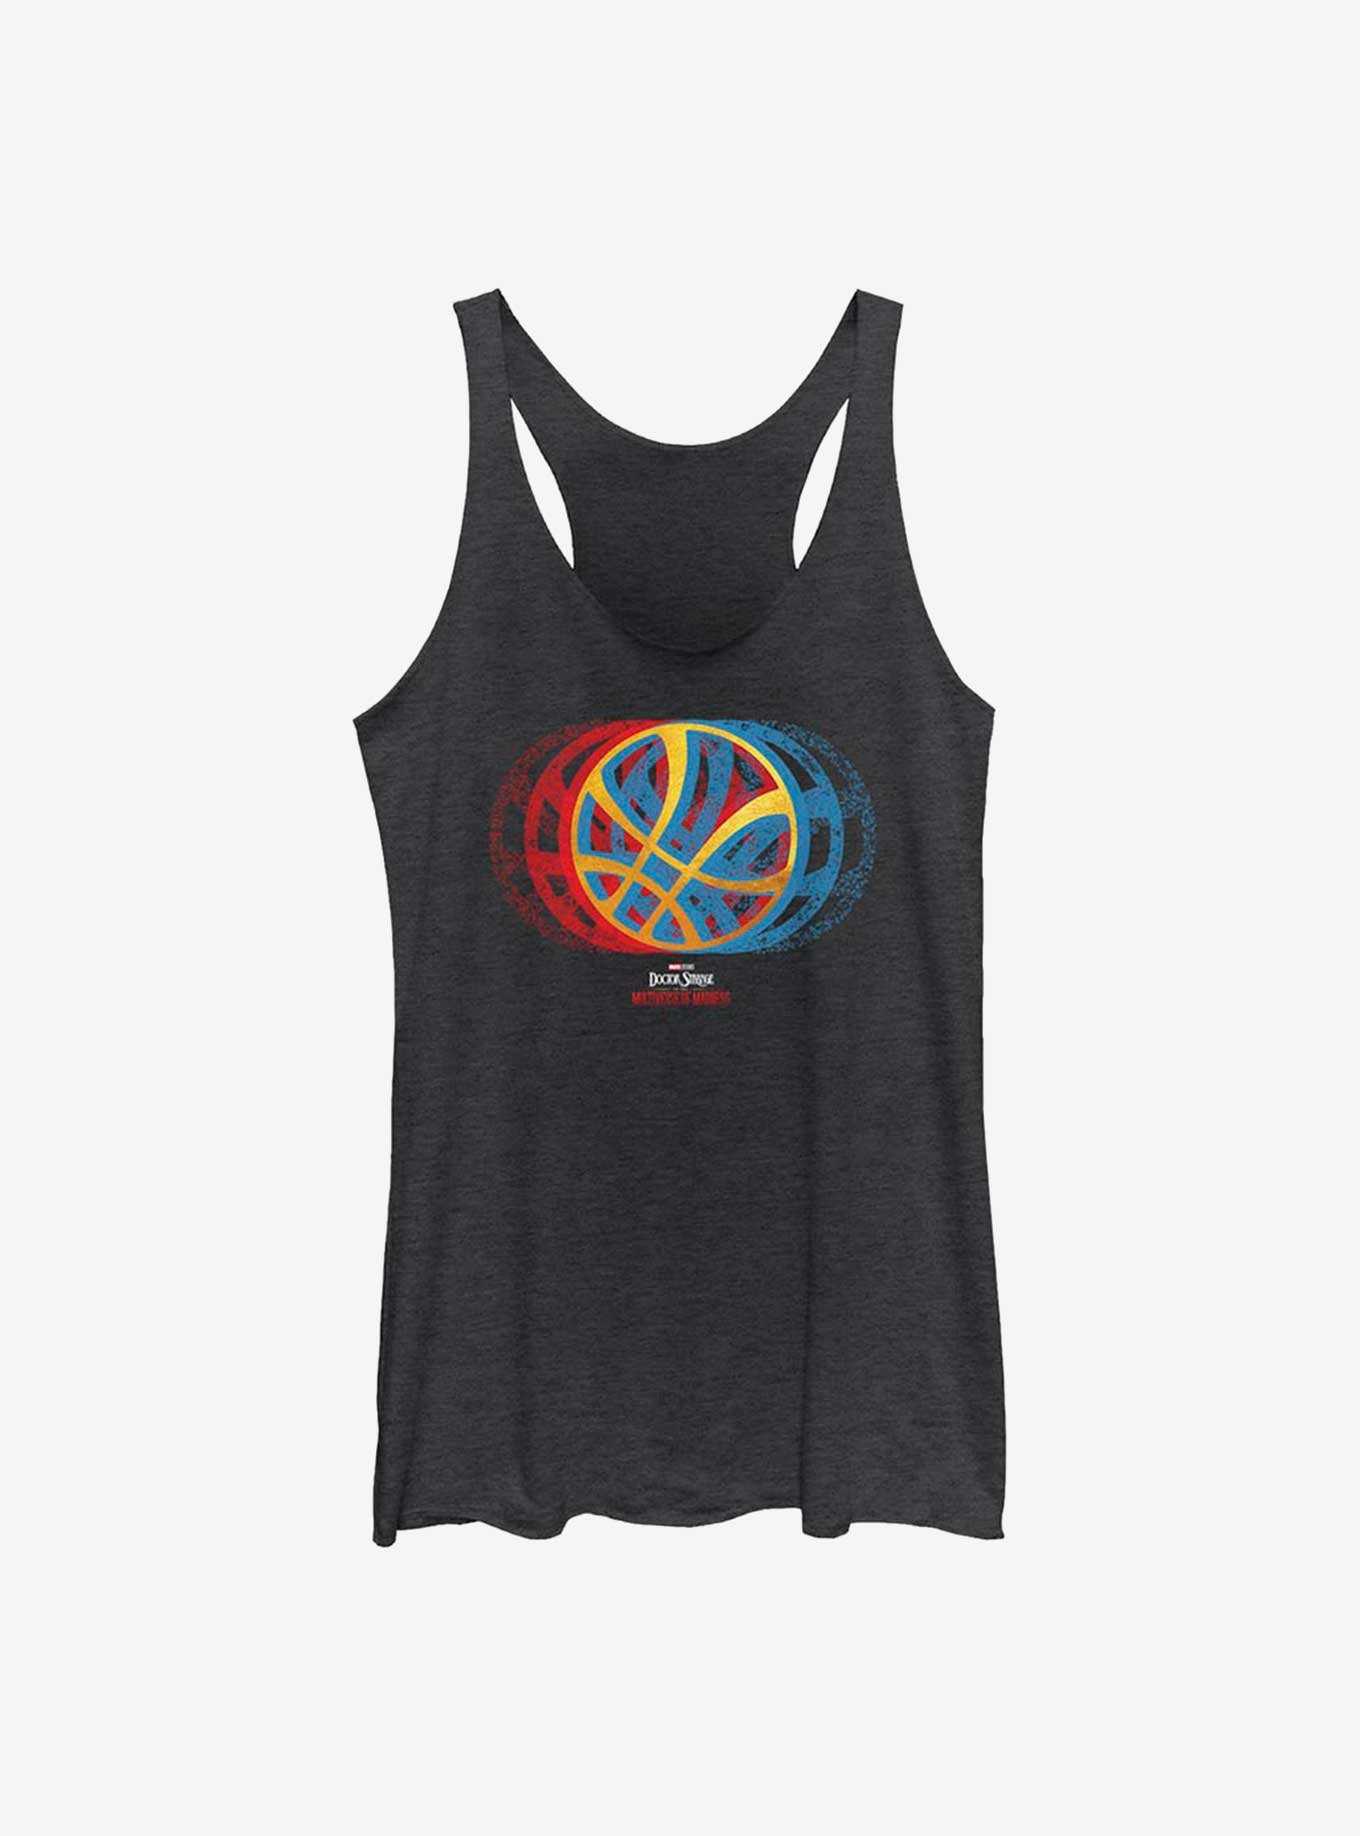 Marvel Doctor Strange In The Multiverse of Madness Gradient Seal Girls Tank, , hi-res